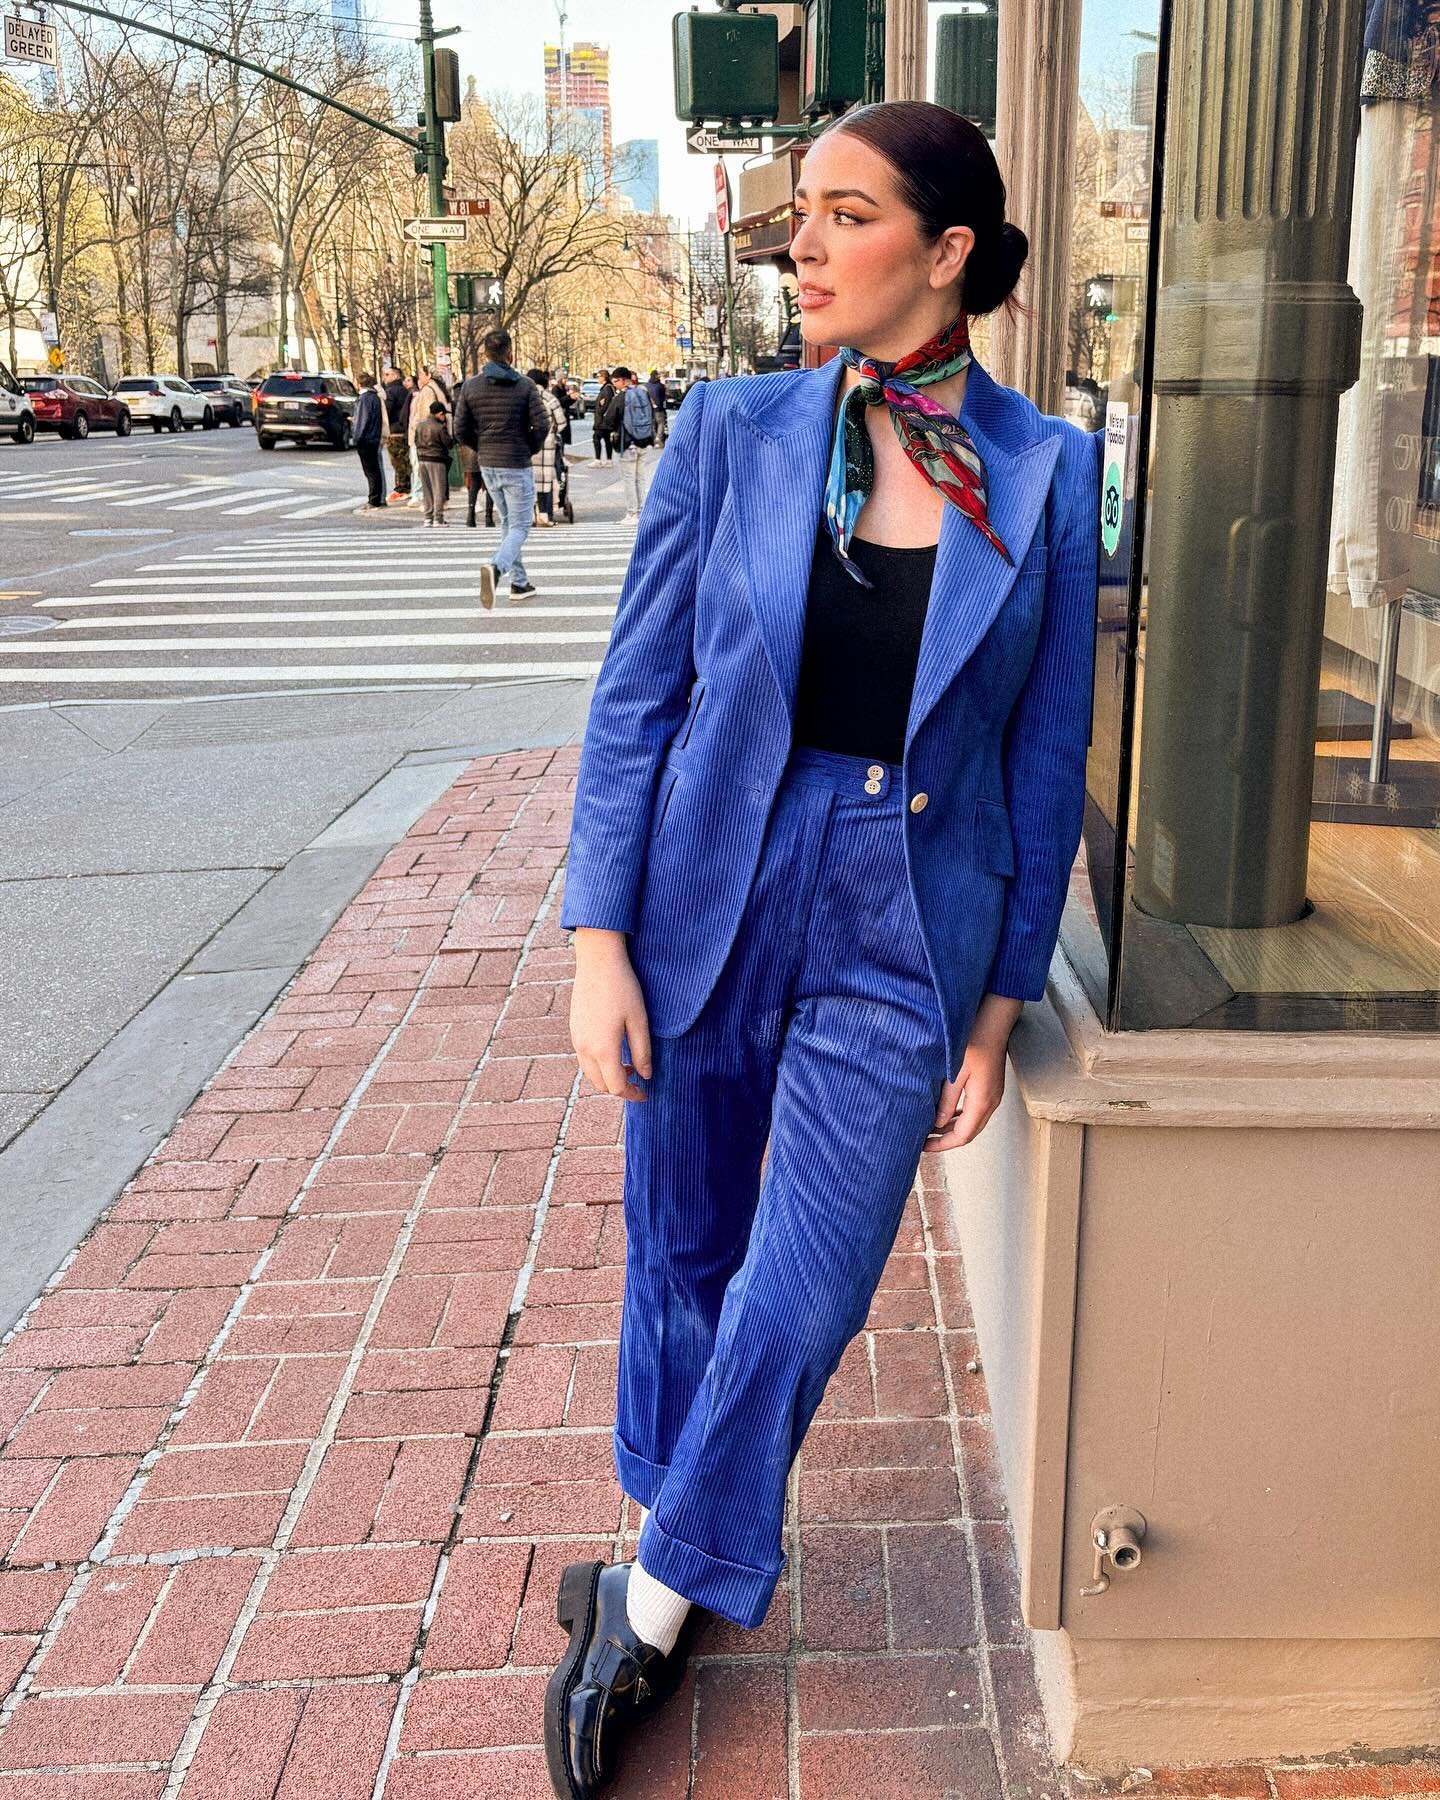 @glamytamy stuns in an electric blue corduroy suit made exclusively for her but us (of course). 

#bespoke #tailoring #womenswear #menswear #madetomeasure #suits